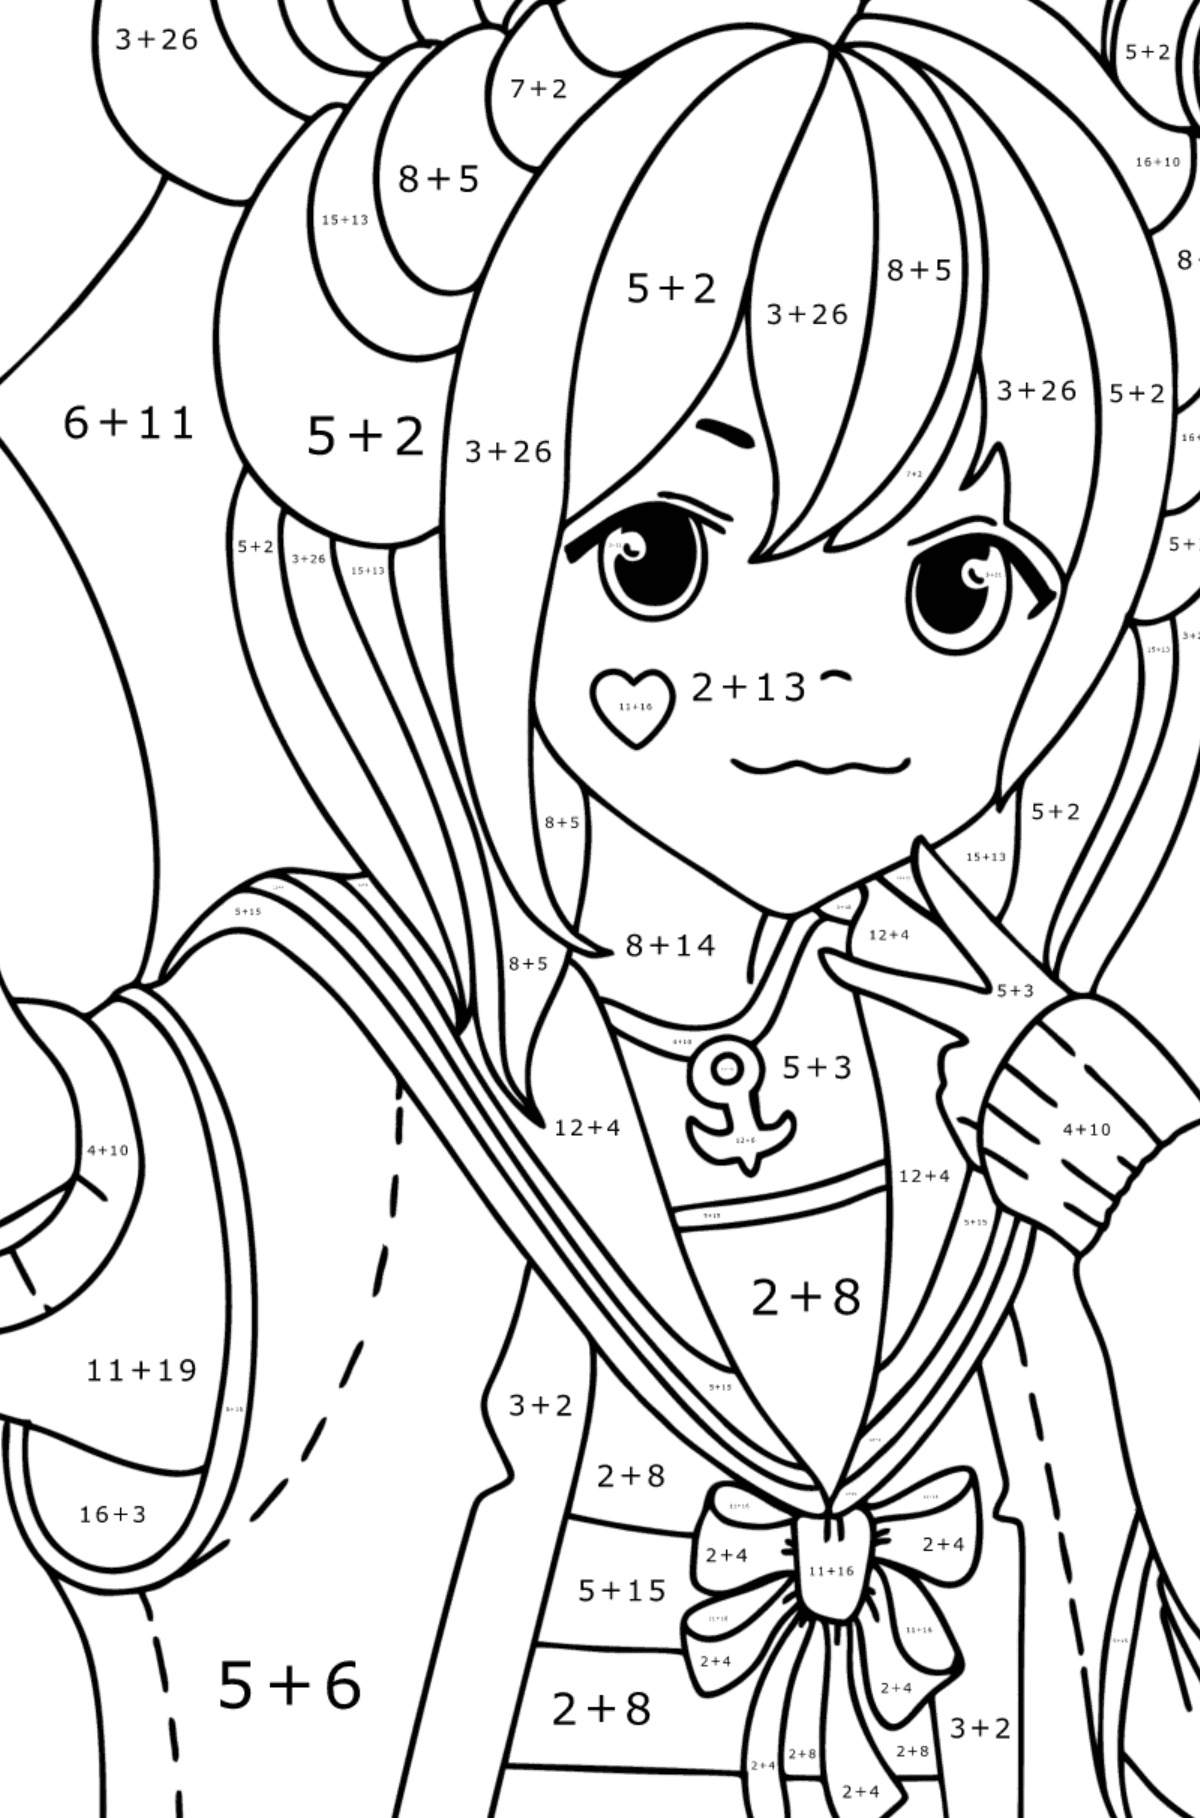 Free Printable Anime Coloring Pages For Kids